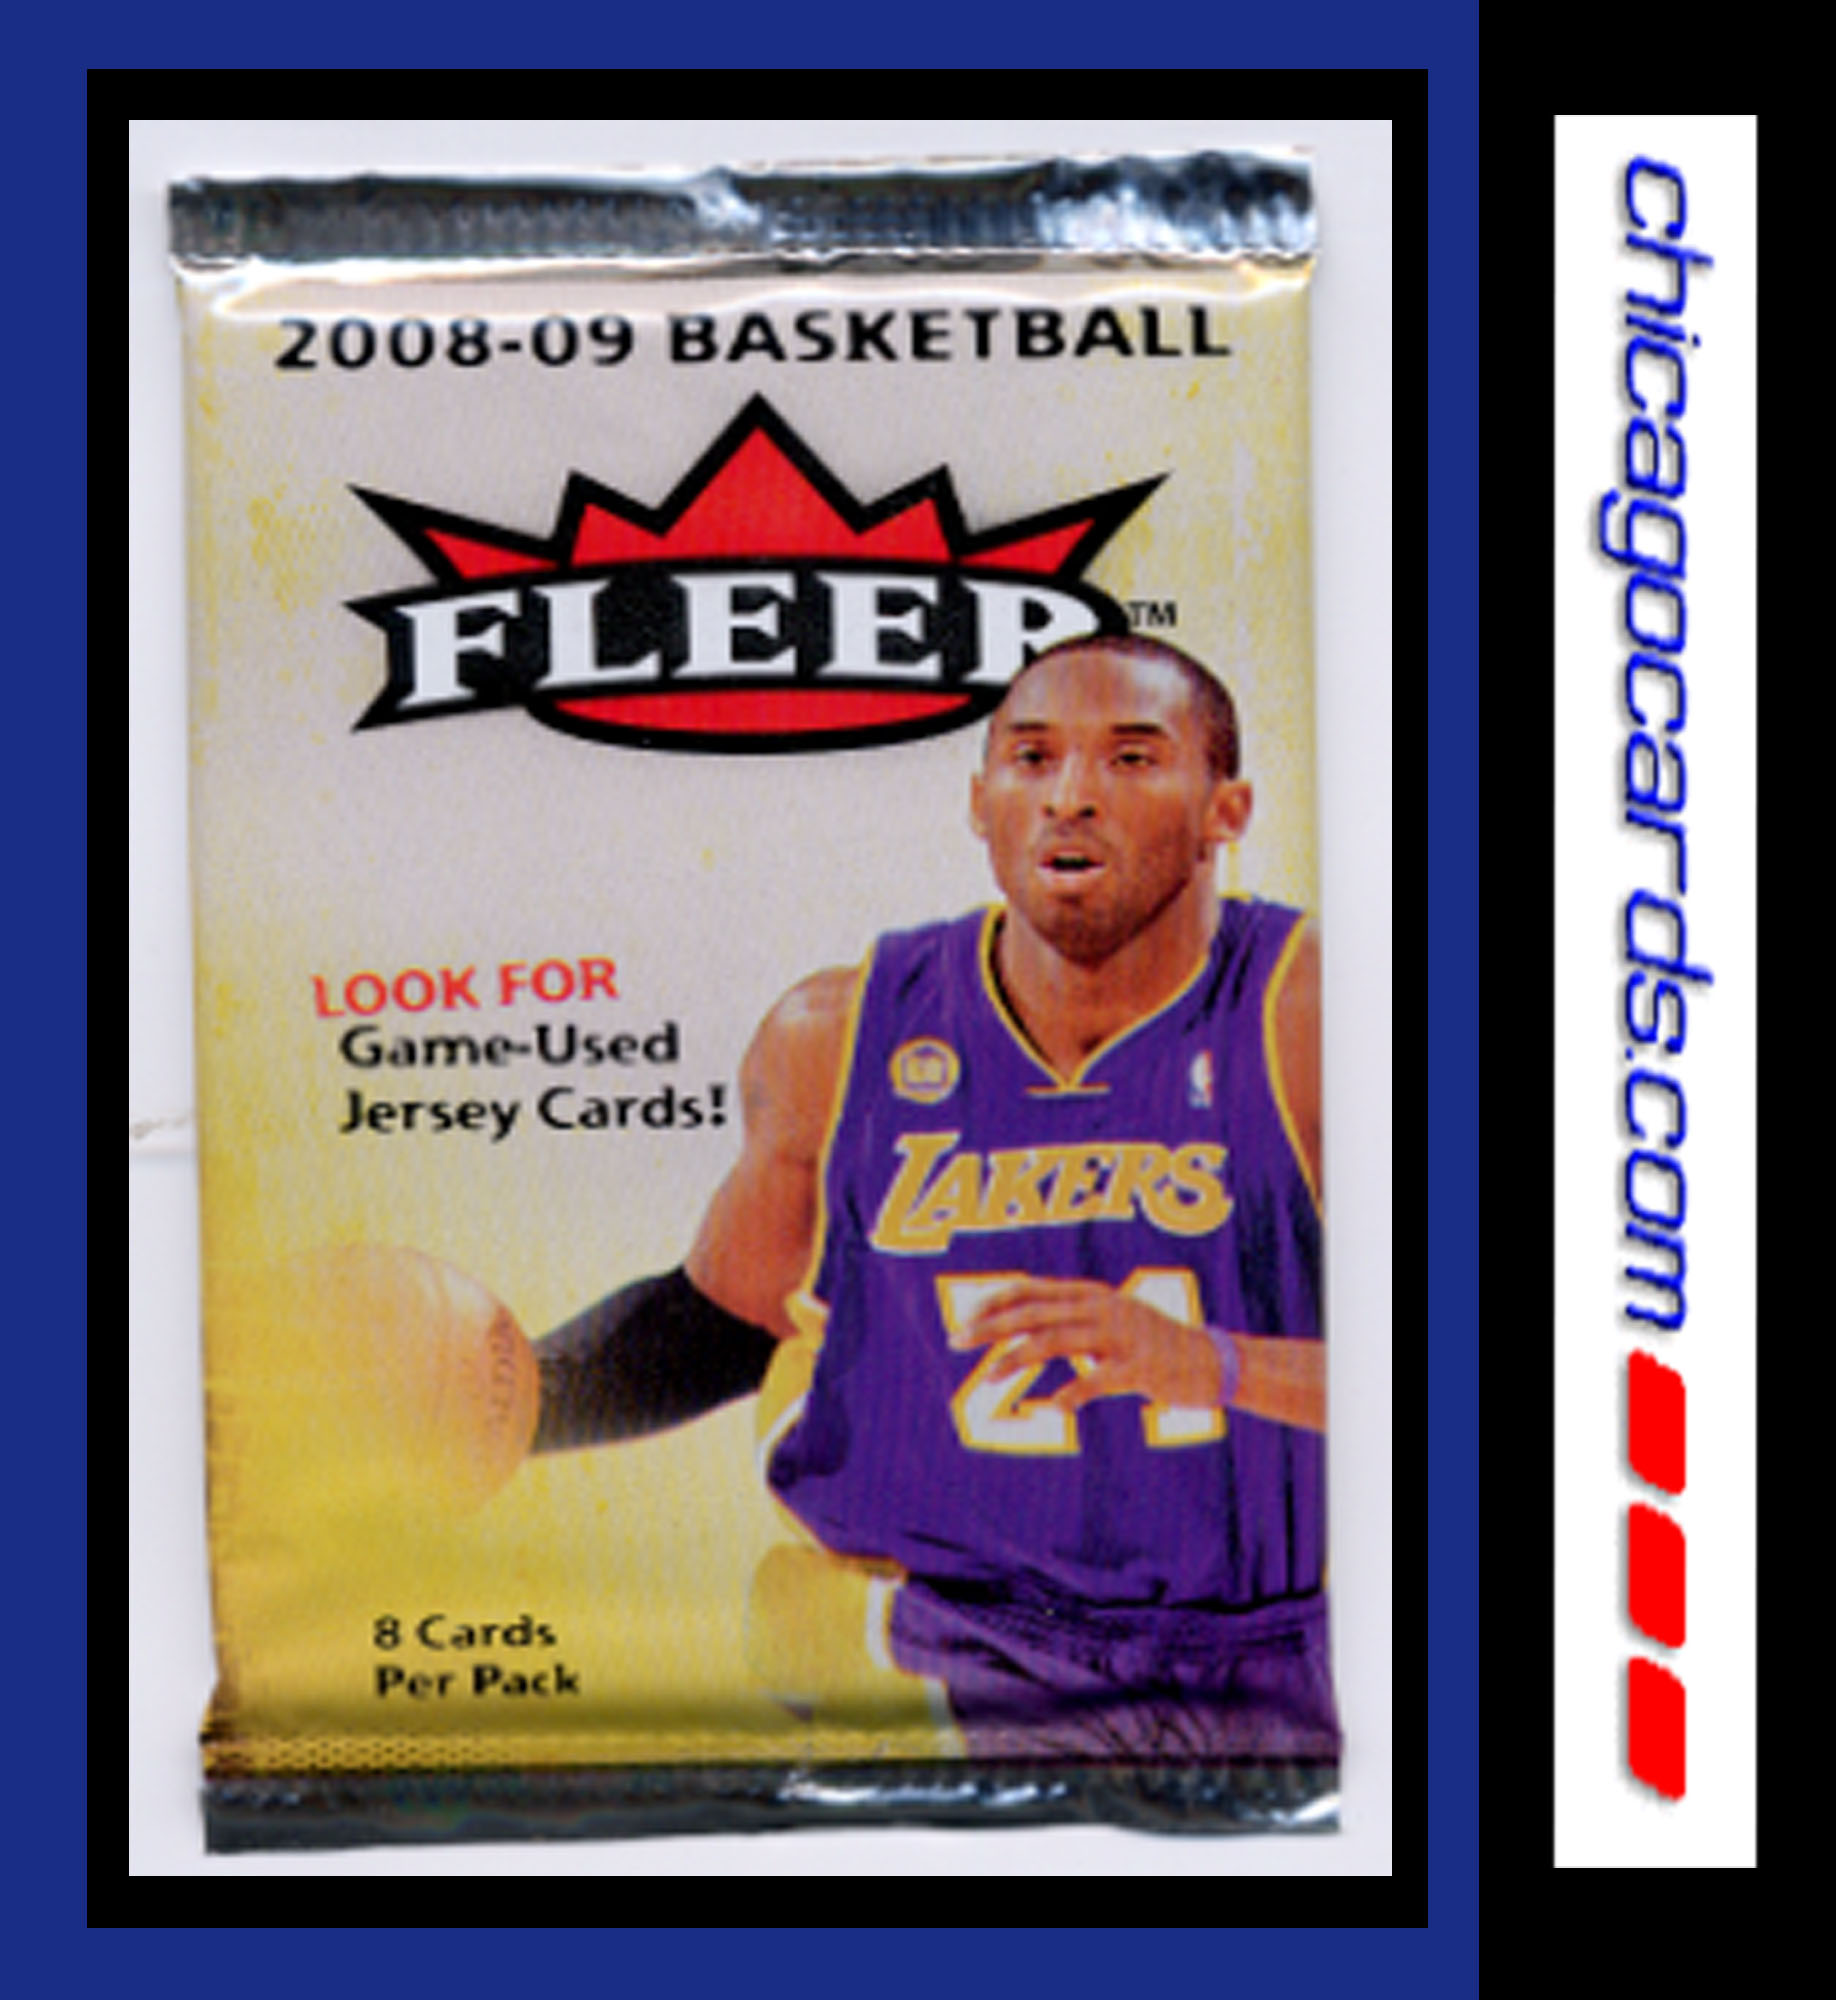 (PACK) 2008-09 (2009) Fleer Factory Sealed Basketball Pack (Look Derrick Rose RC, Russell Westbrook RC, Eric Gordon RC and much more!) 8 Cards per Pack!